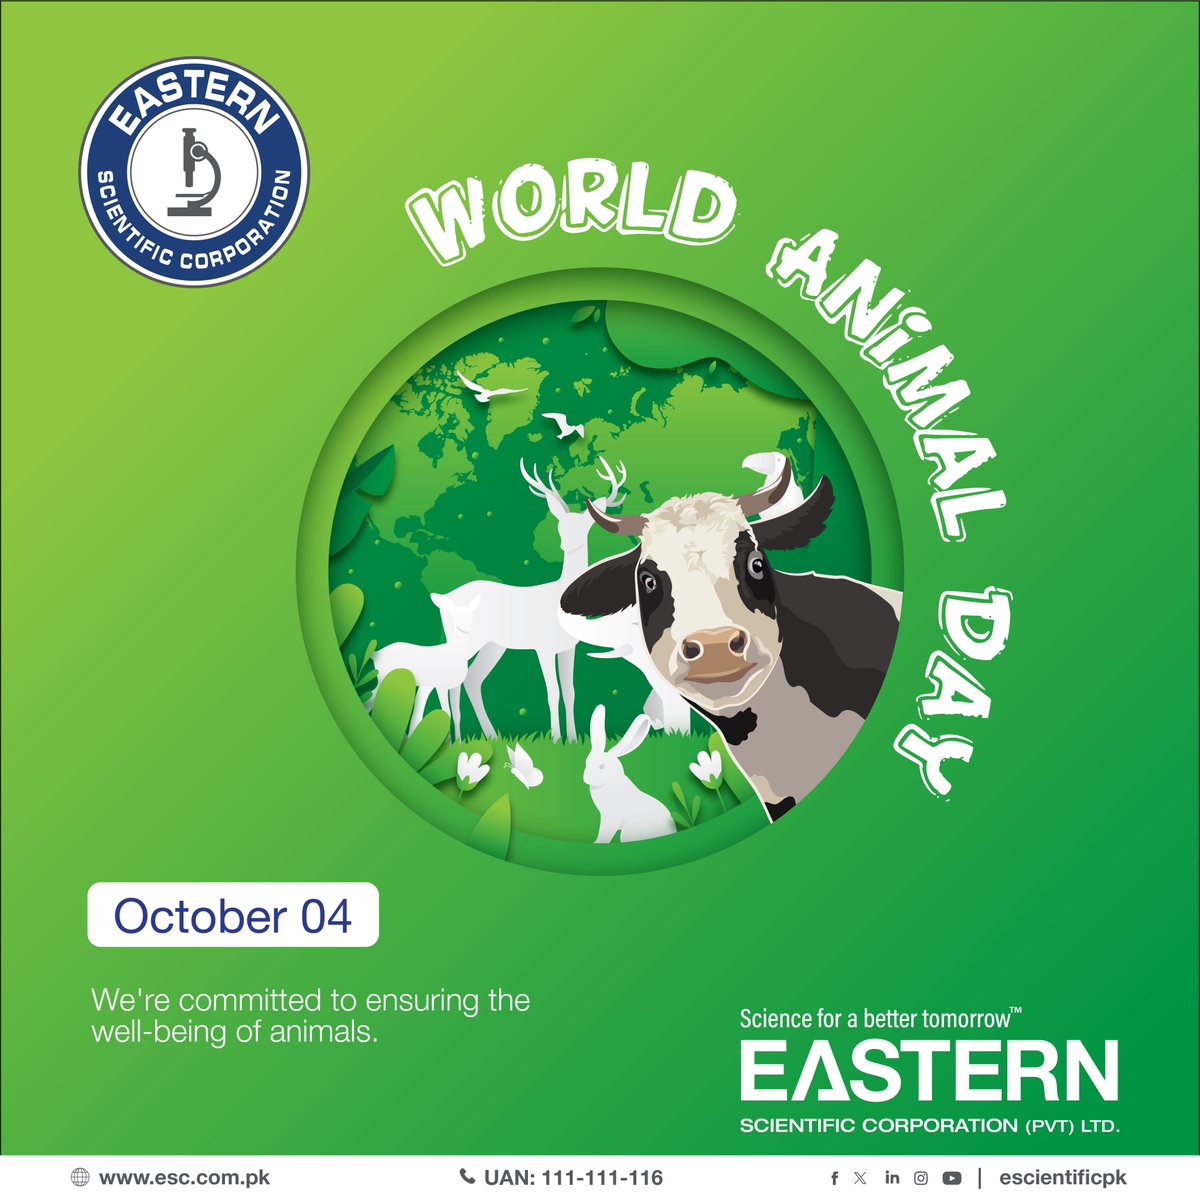 WORLD ANIMAL DAY is observed to make the world a better place for animals. Be part of the movement to raise the welfare standards of all animals around the globe.
#EasternScientificCorporation #escientificpk #WorldAnimalDay #AnimalHealth #VetrinaryCare #RapidTest #AnimalDiseases